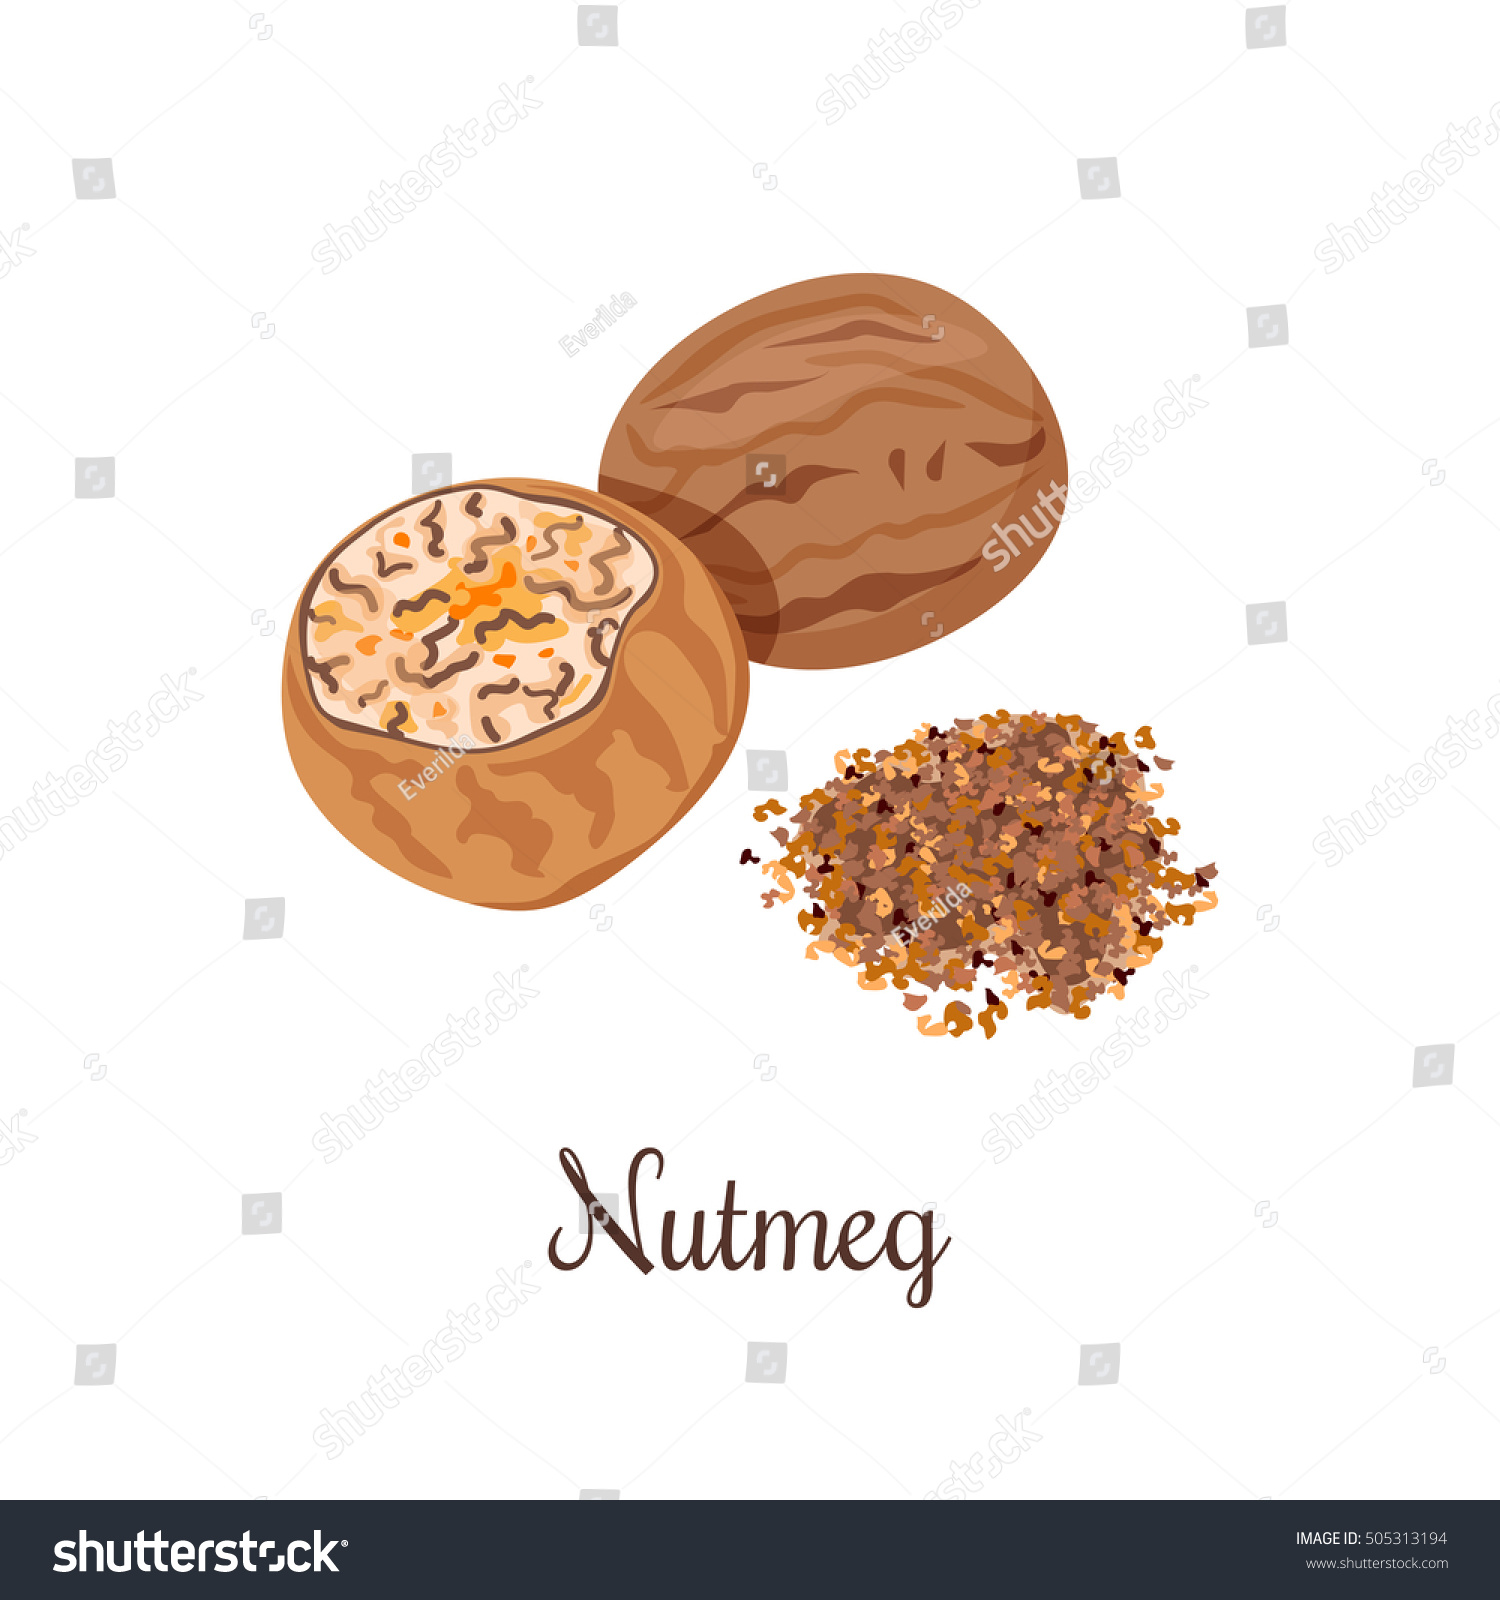 Nutmeg whole and crushed powder. Spices isolated on white background. Vector illustration. Can be used for package, prints, wrapping, menu, price tag, label, healthy brochure, organic. As logo, symbol #505313194